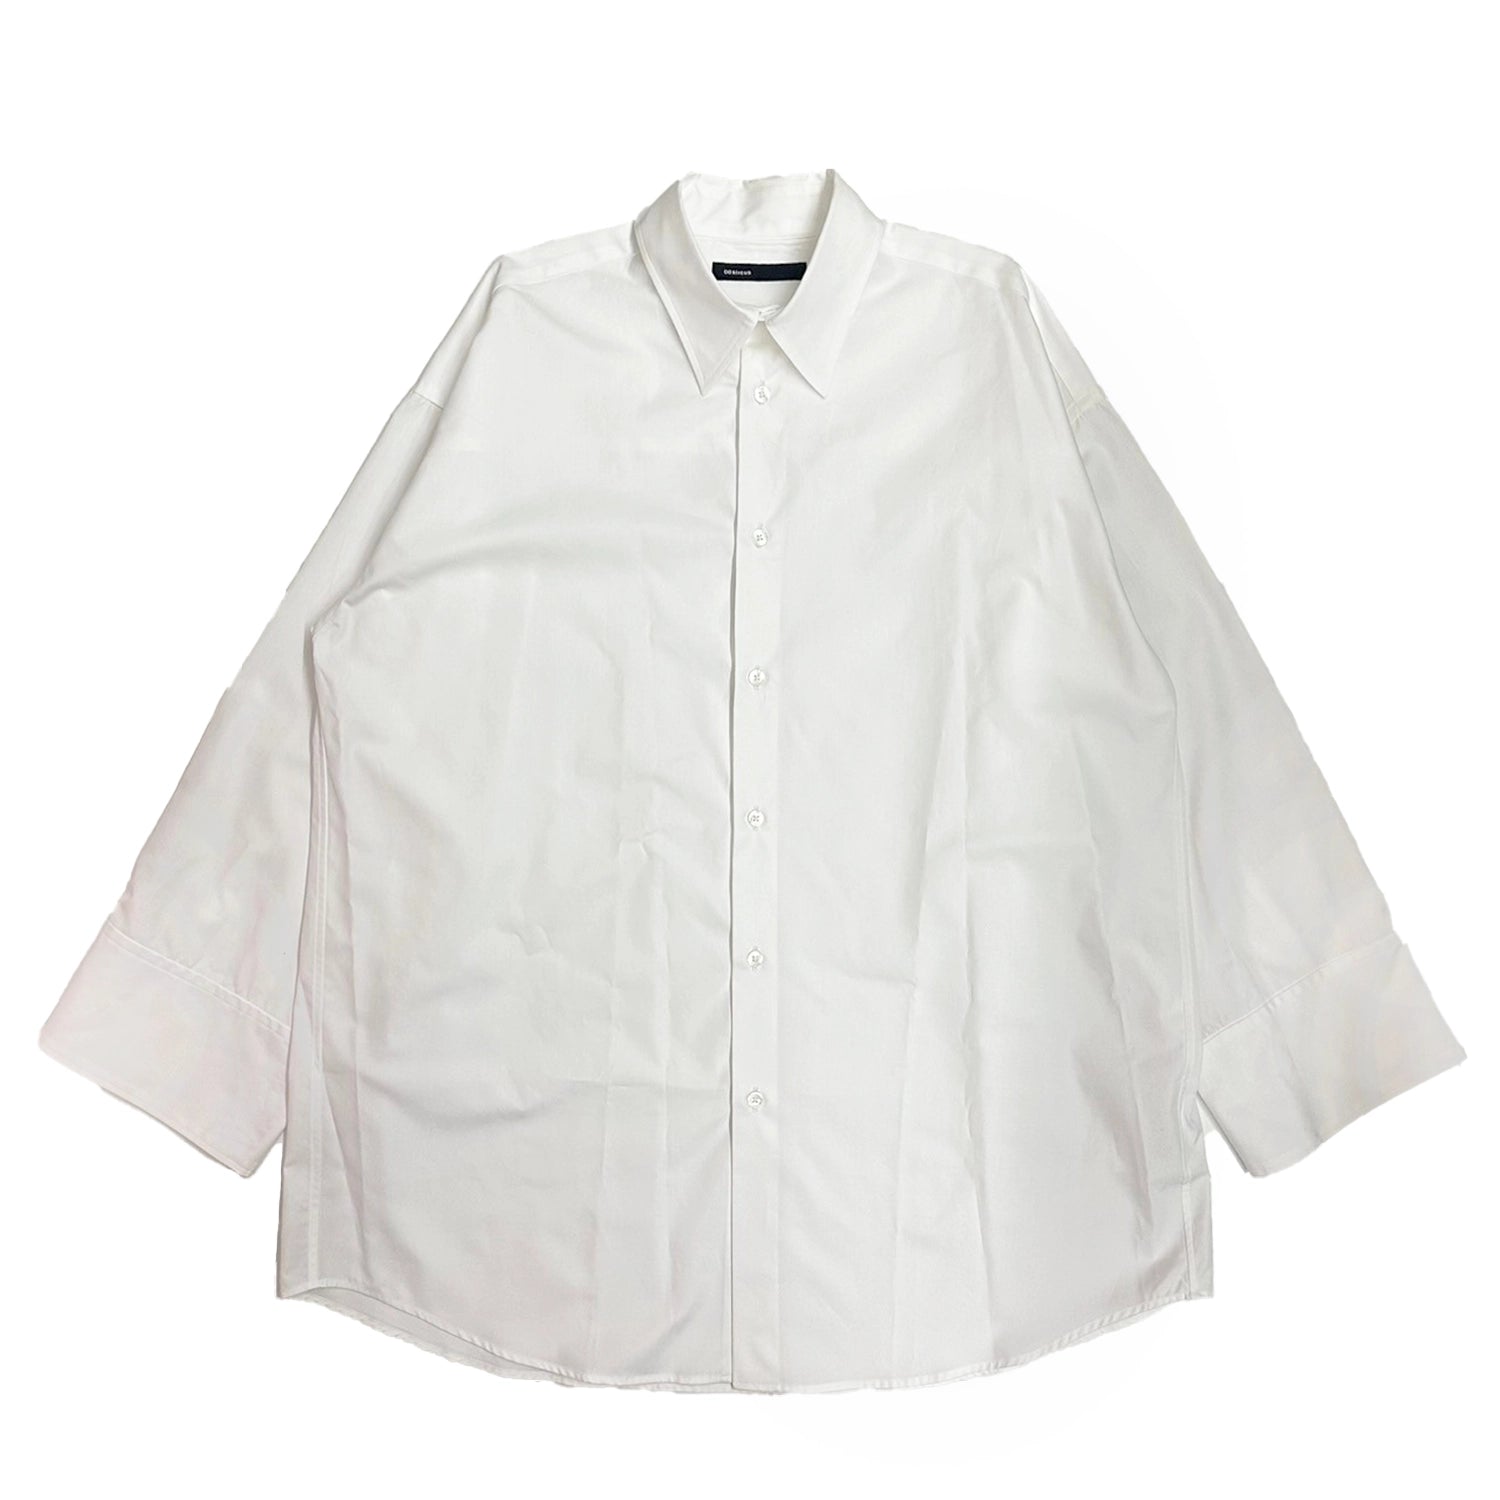 08sircus の Broad over size shirt